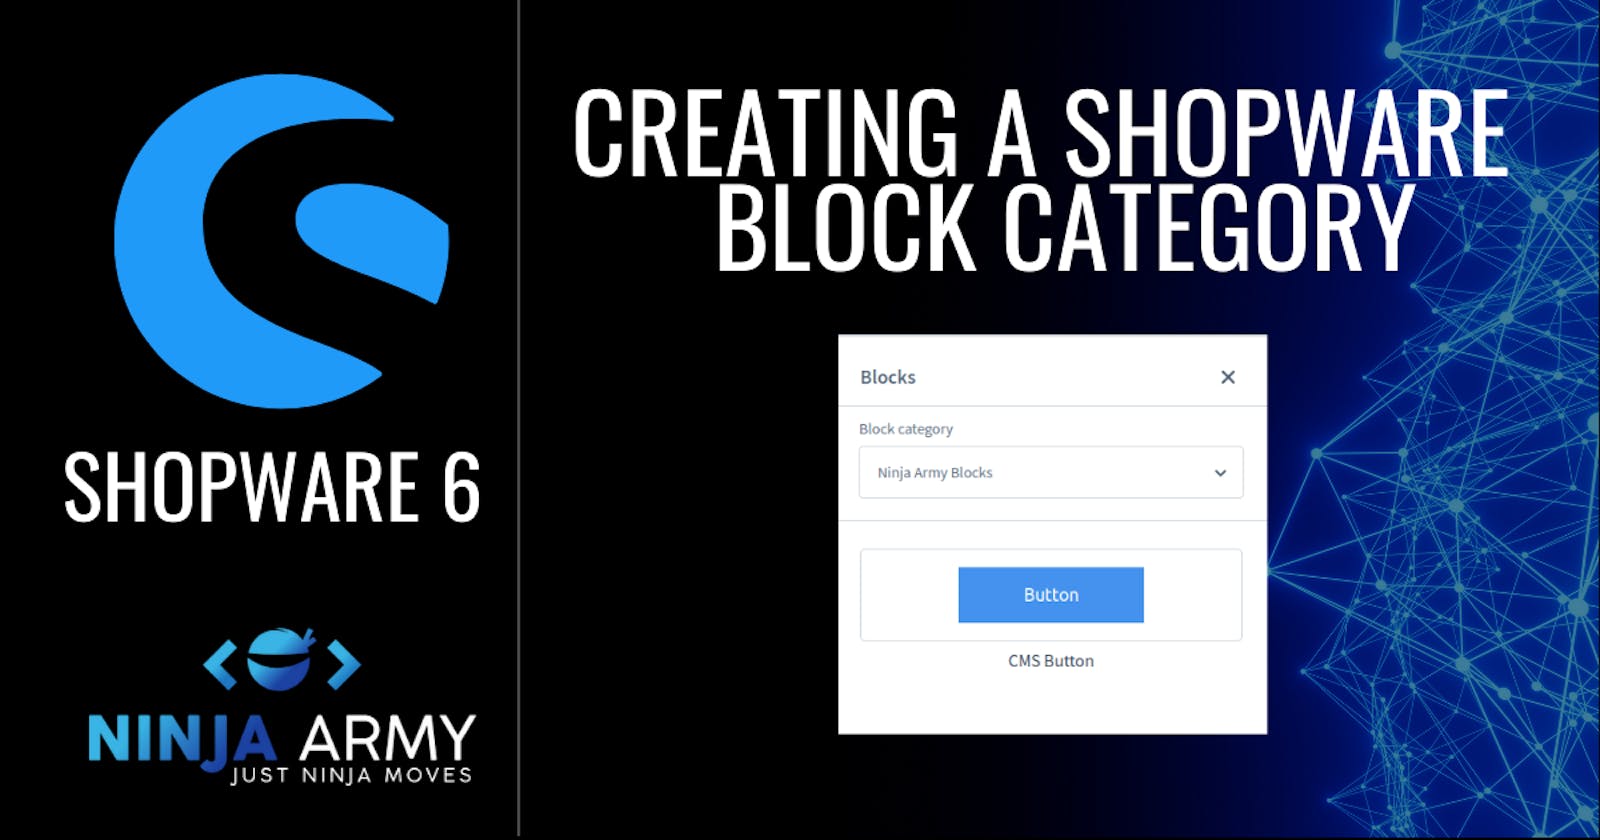 Creating a block category in Shopware 6